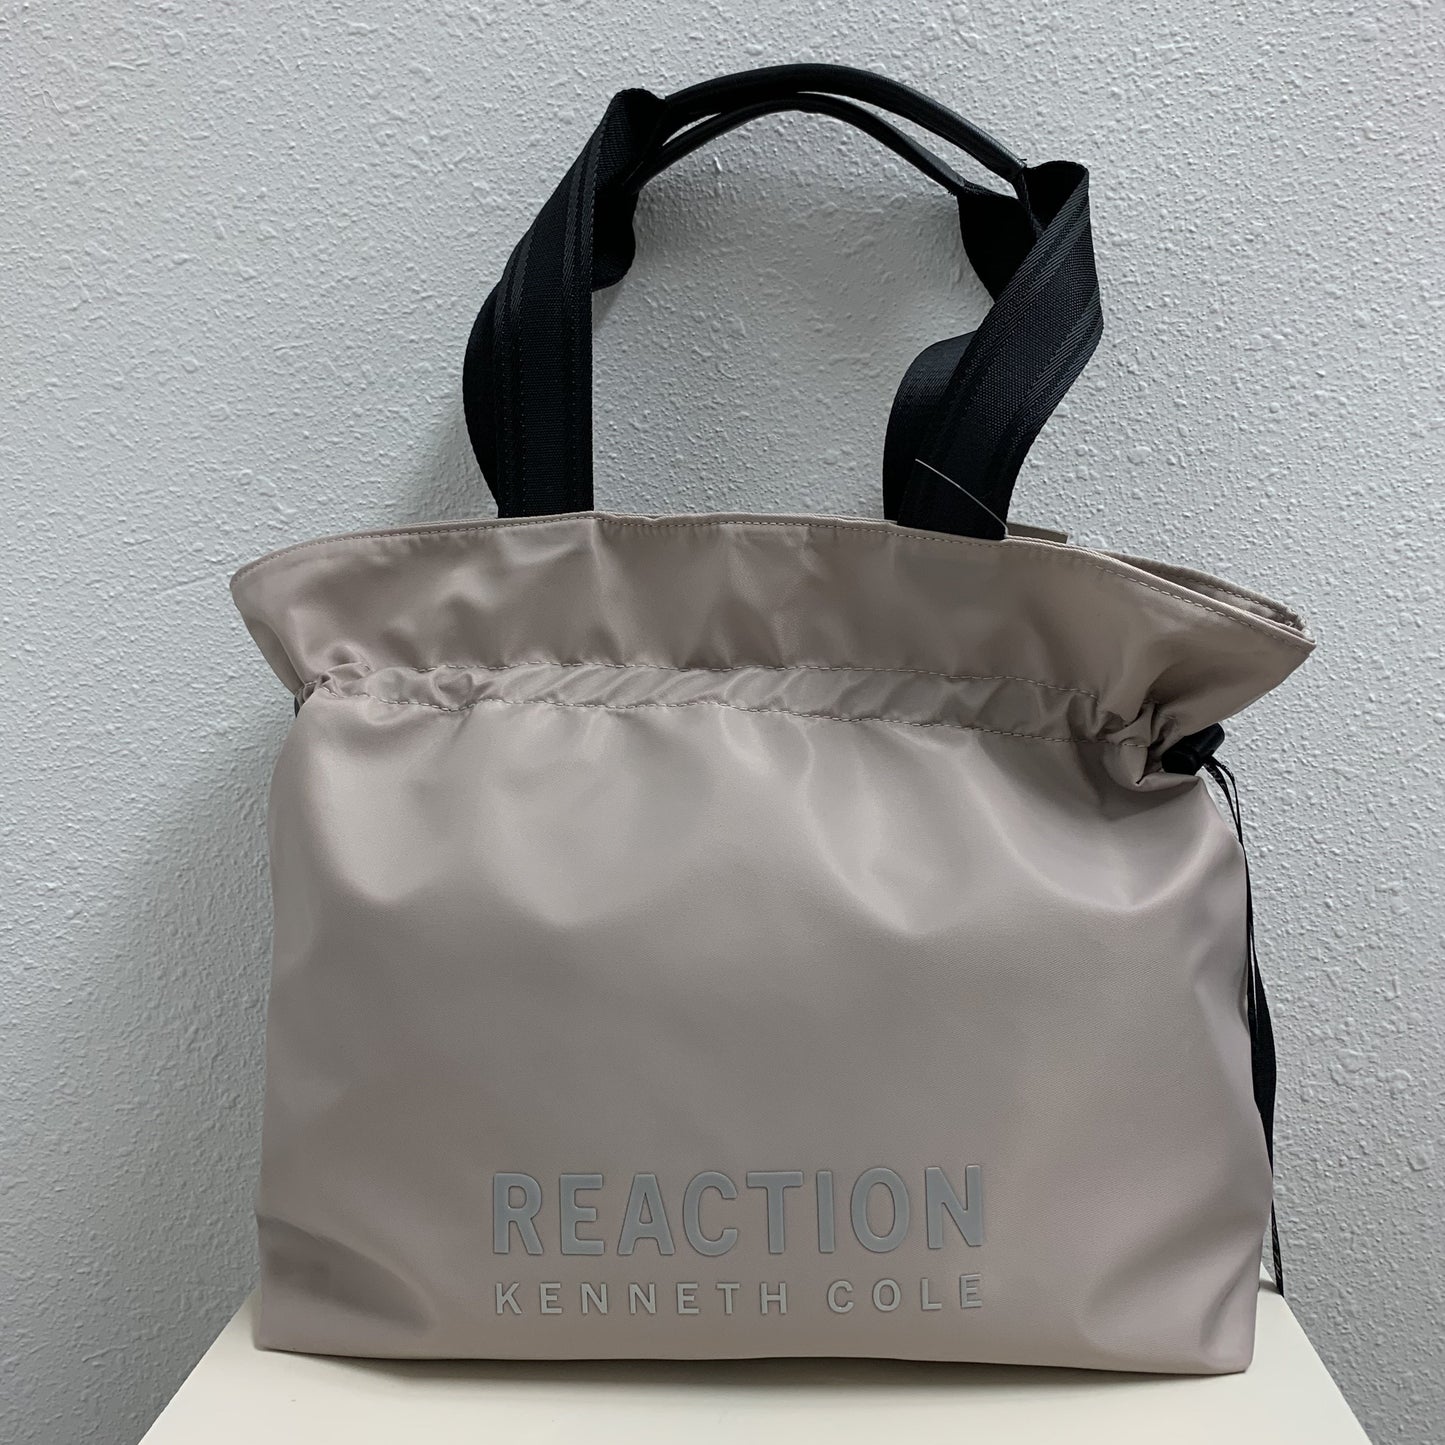 Kenneth Cole Breezy Tote